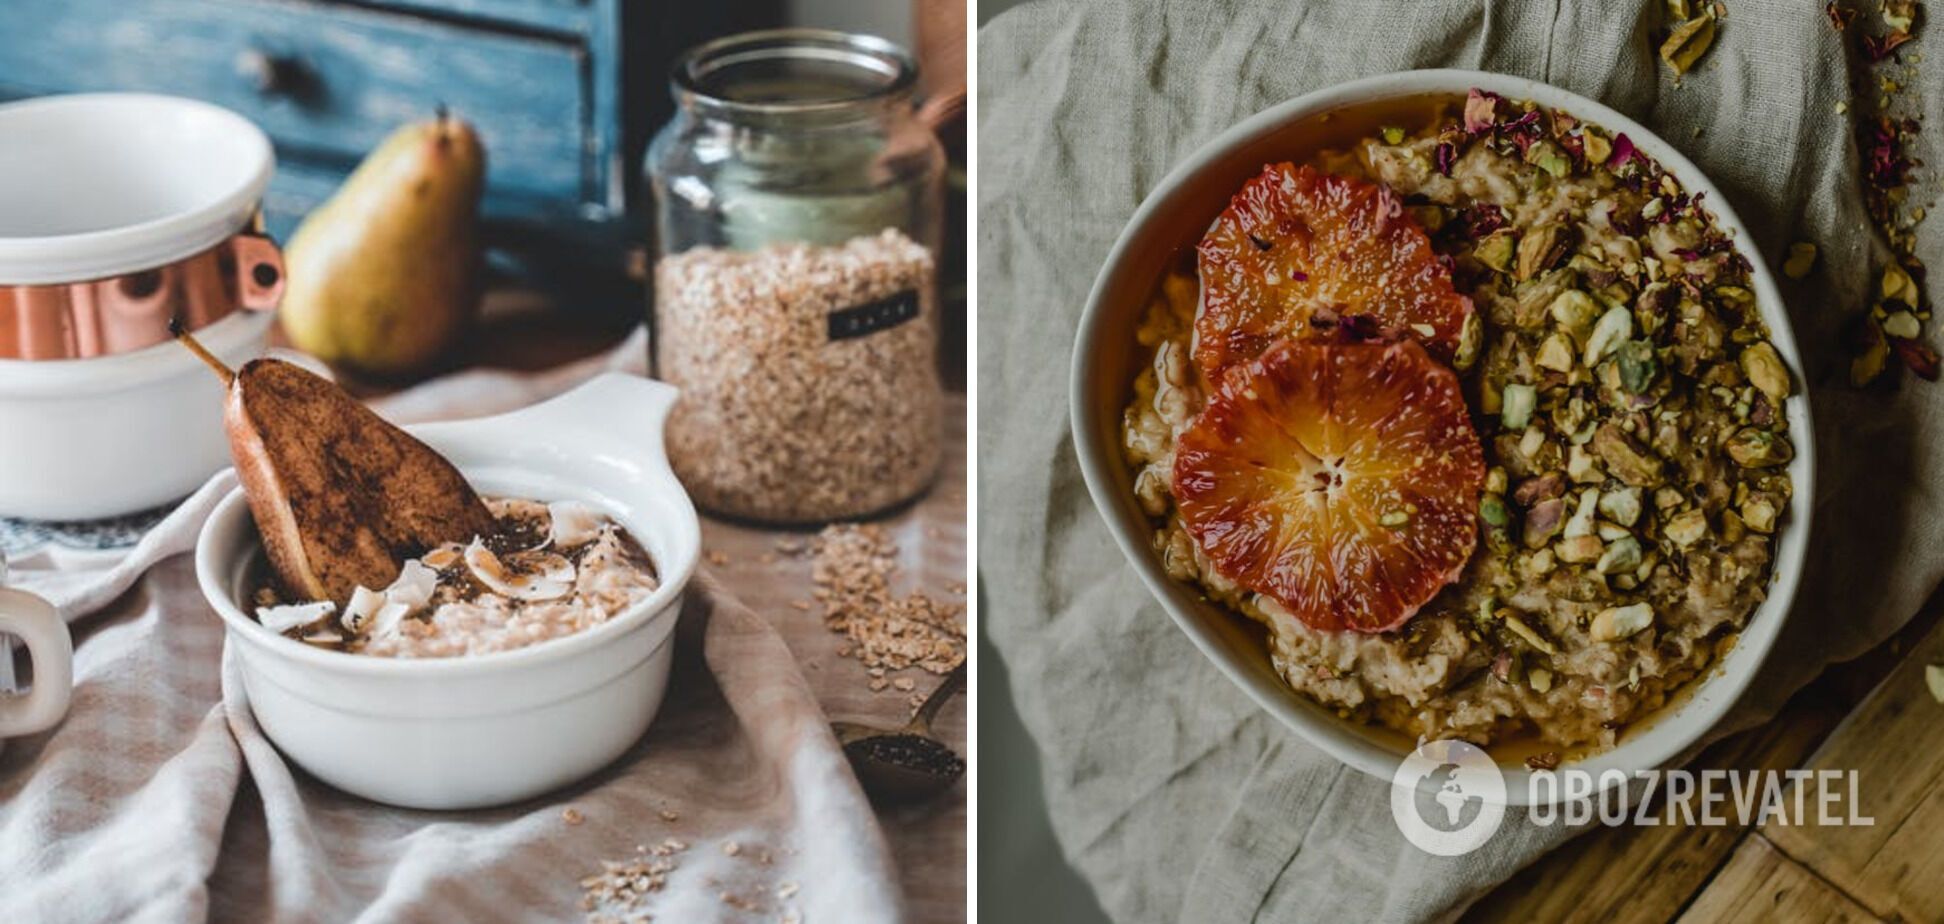 How and how much to cook oatmeal